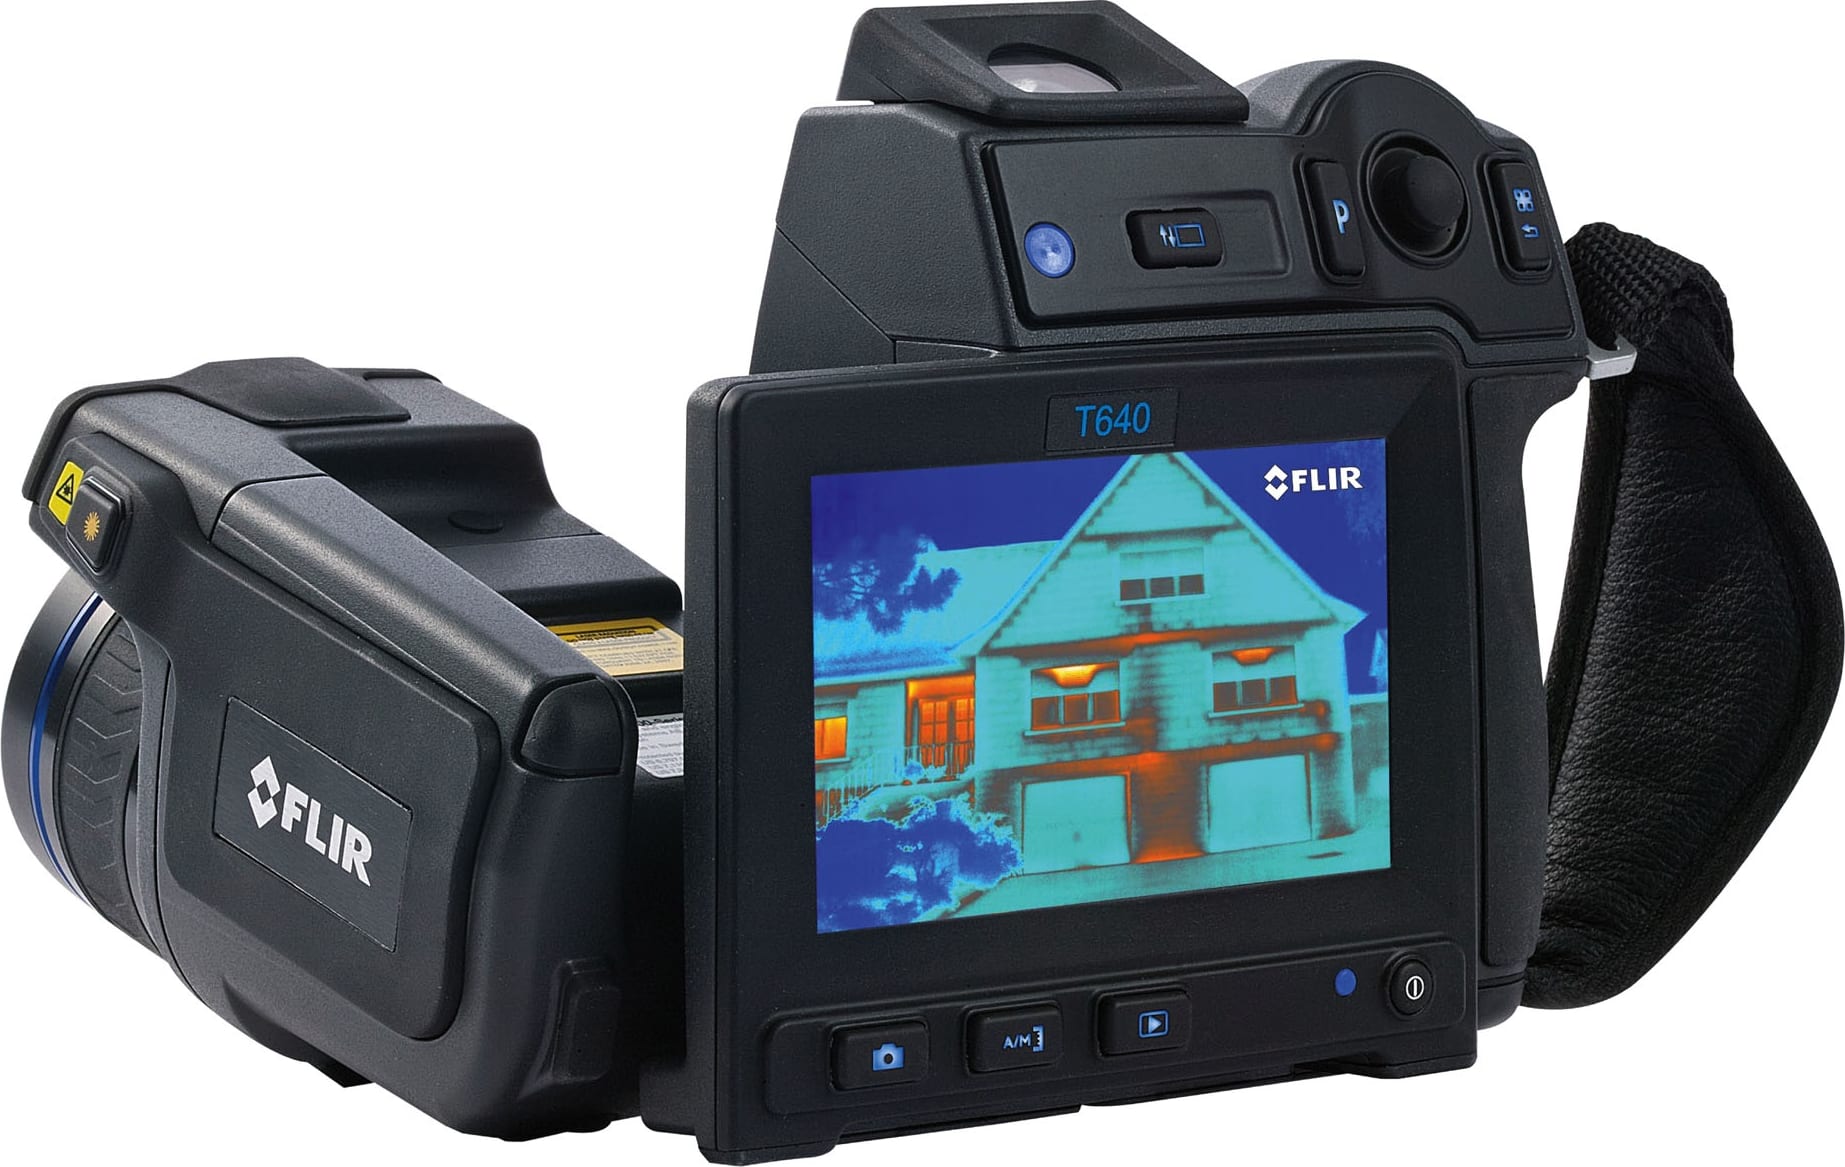 FLIR_T620bx-15_Infrared_Camera_for_Building_Maintenance_640_x_480_Resolution-30Hz_With_15-Degree_Lens_Main_View